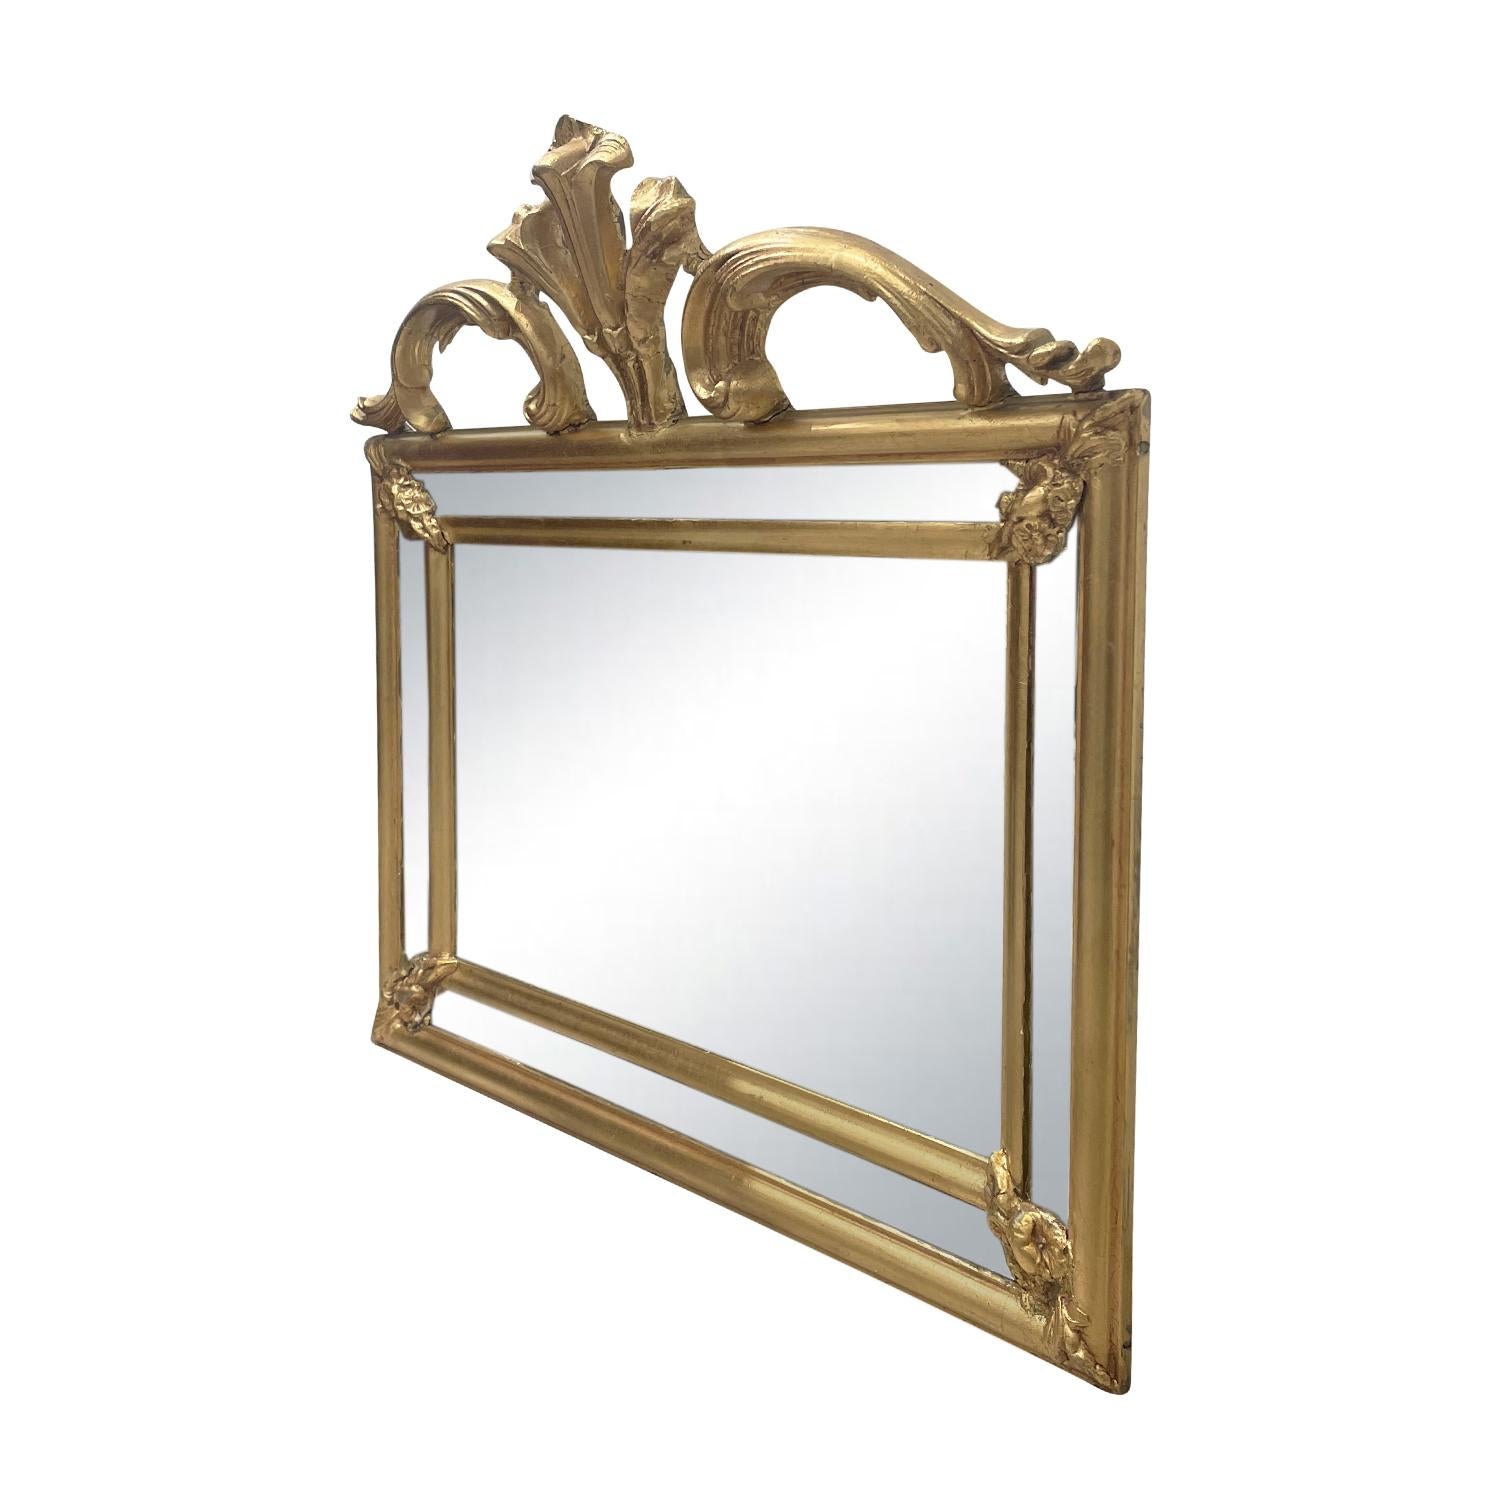 An antique French rectangular wall mirror made of hand carved gilded Pinewood with its original mirror glass, in good condition. The arched mirror is particularized by detailed flower carvings and fittings. The Parisian décor piece represents the